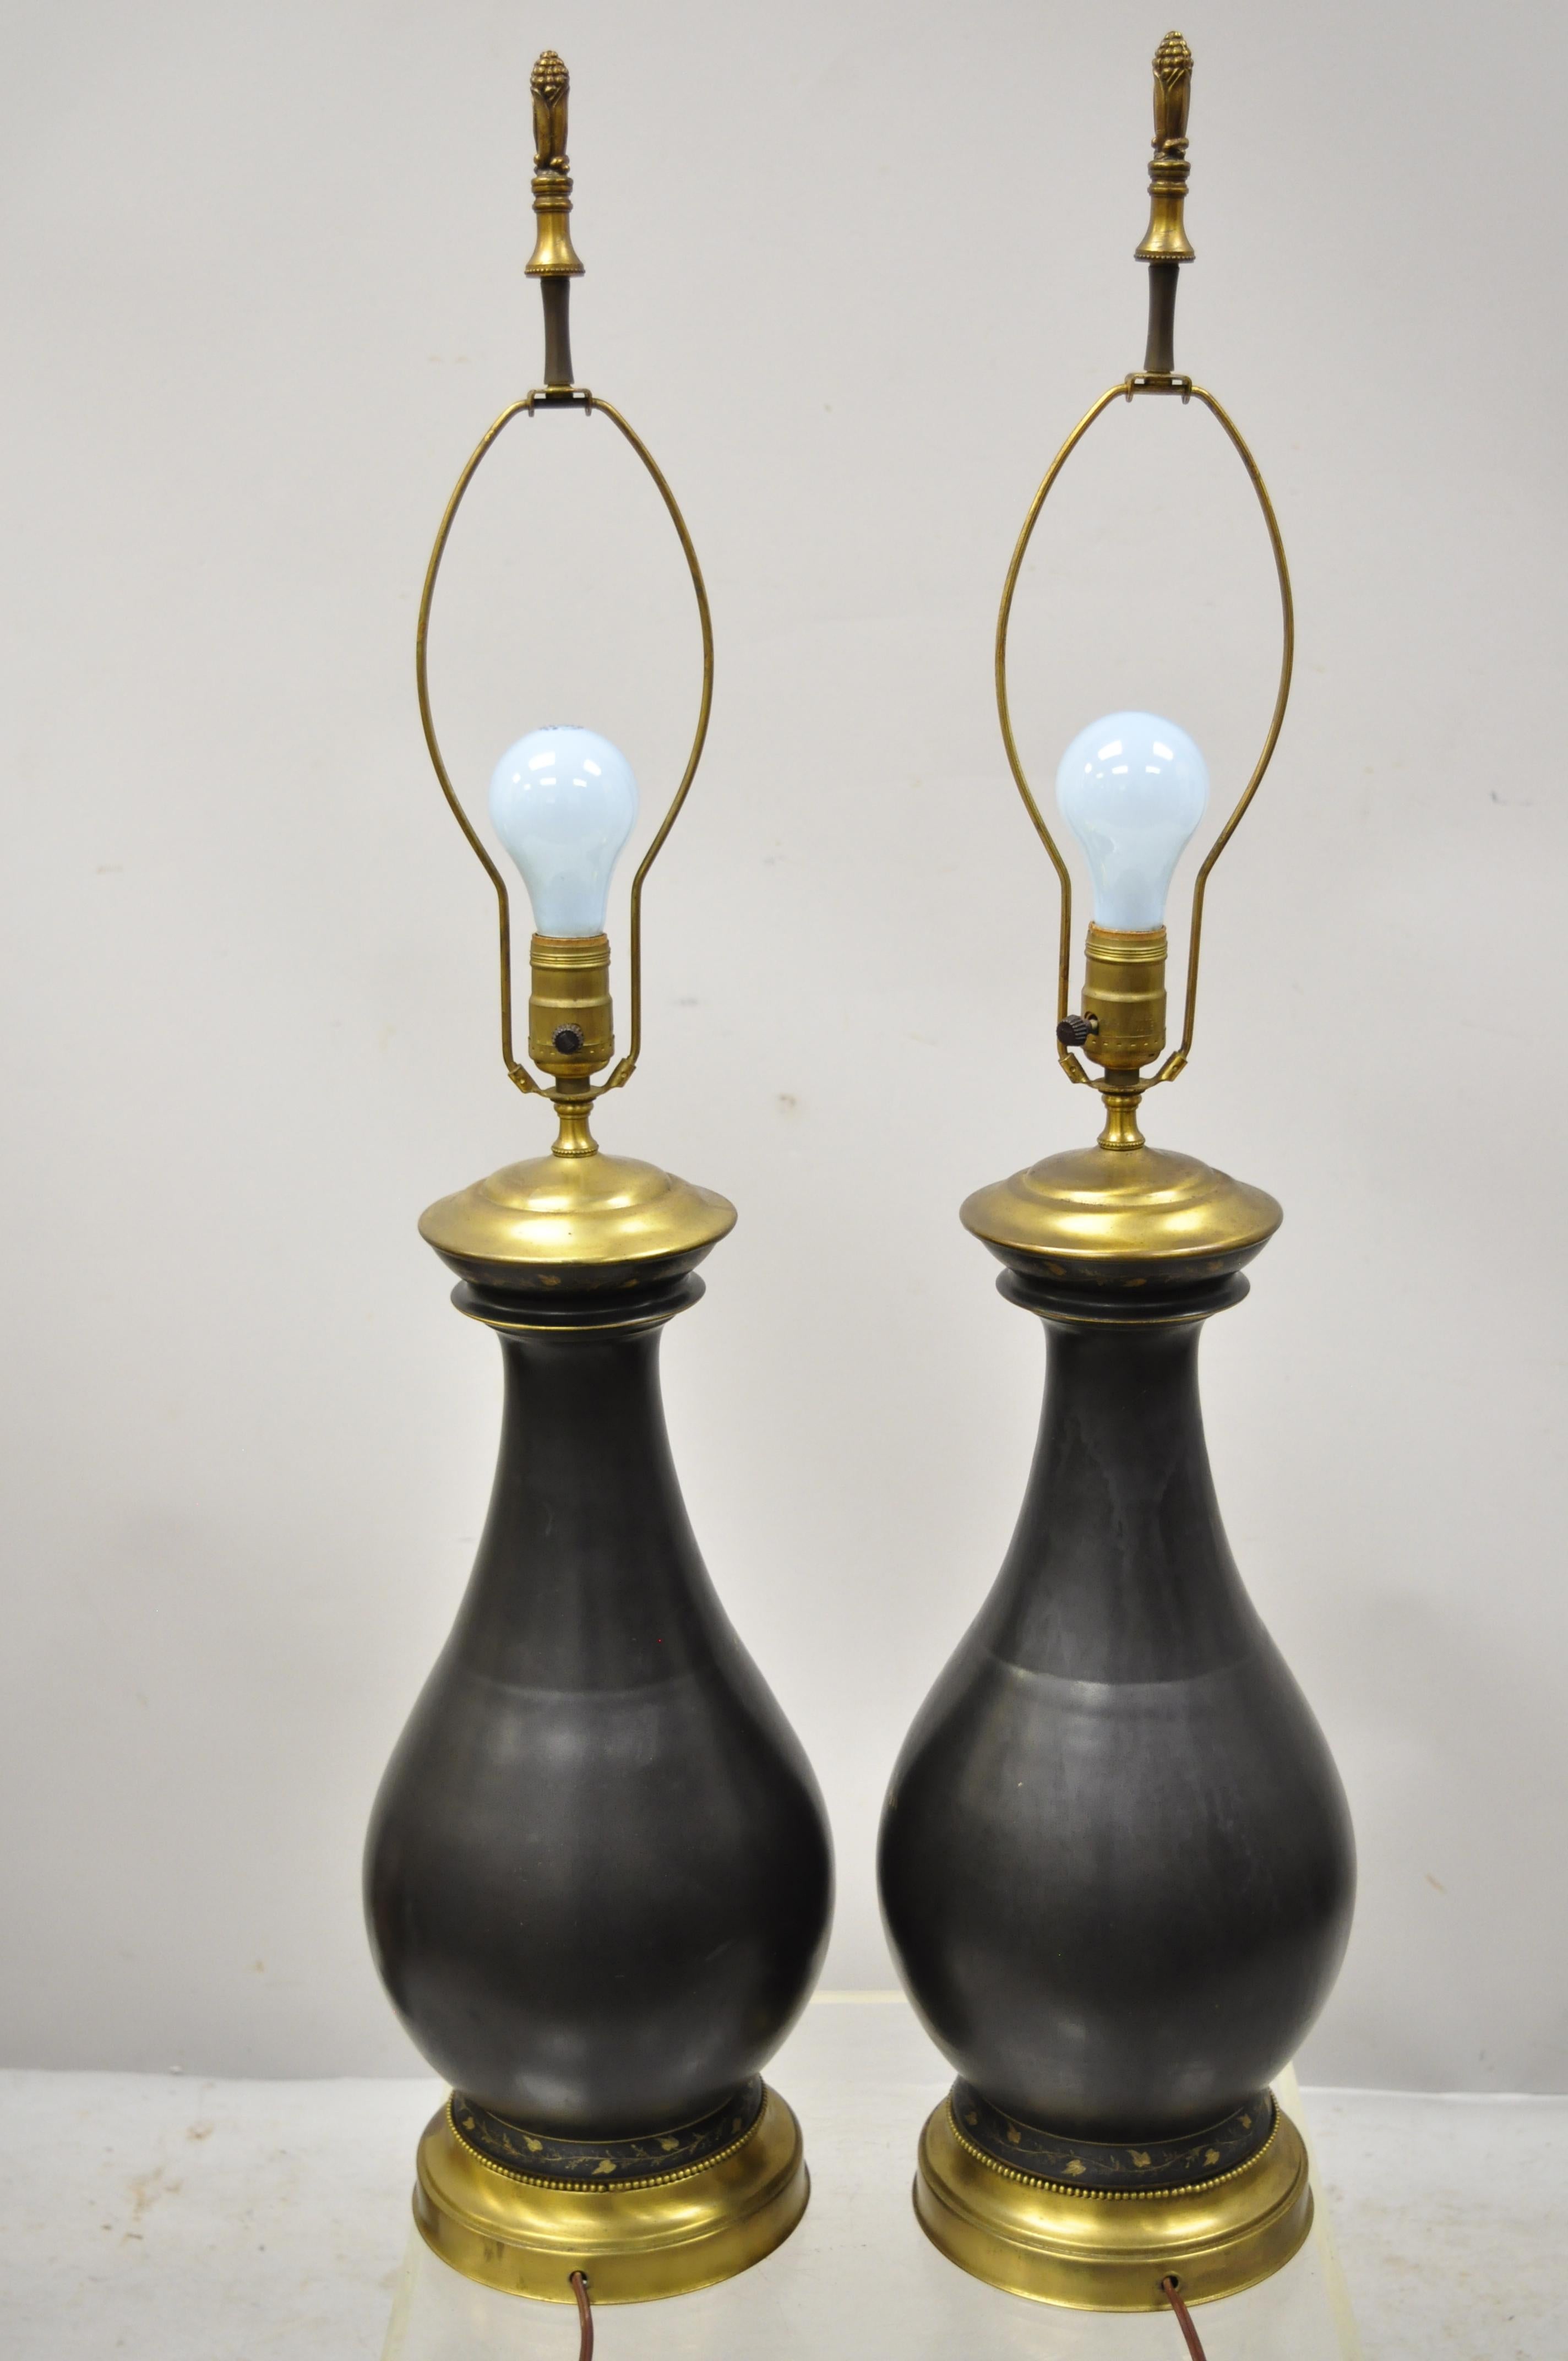 Antique French Neoclassical Black Porcelain Classical Bulbous Table Lamps, Pair For Sale 5